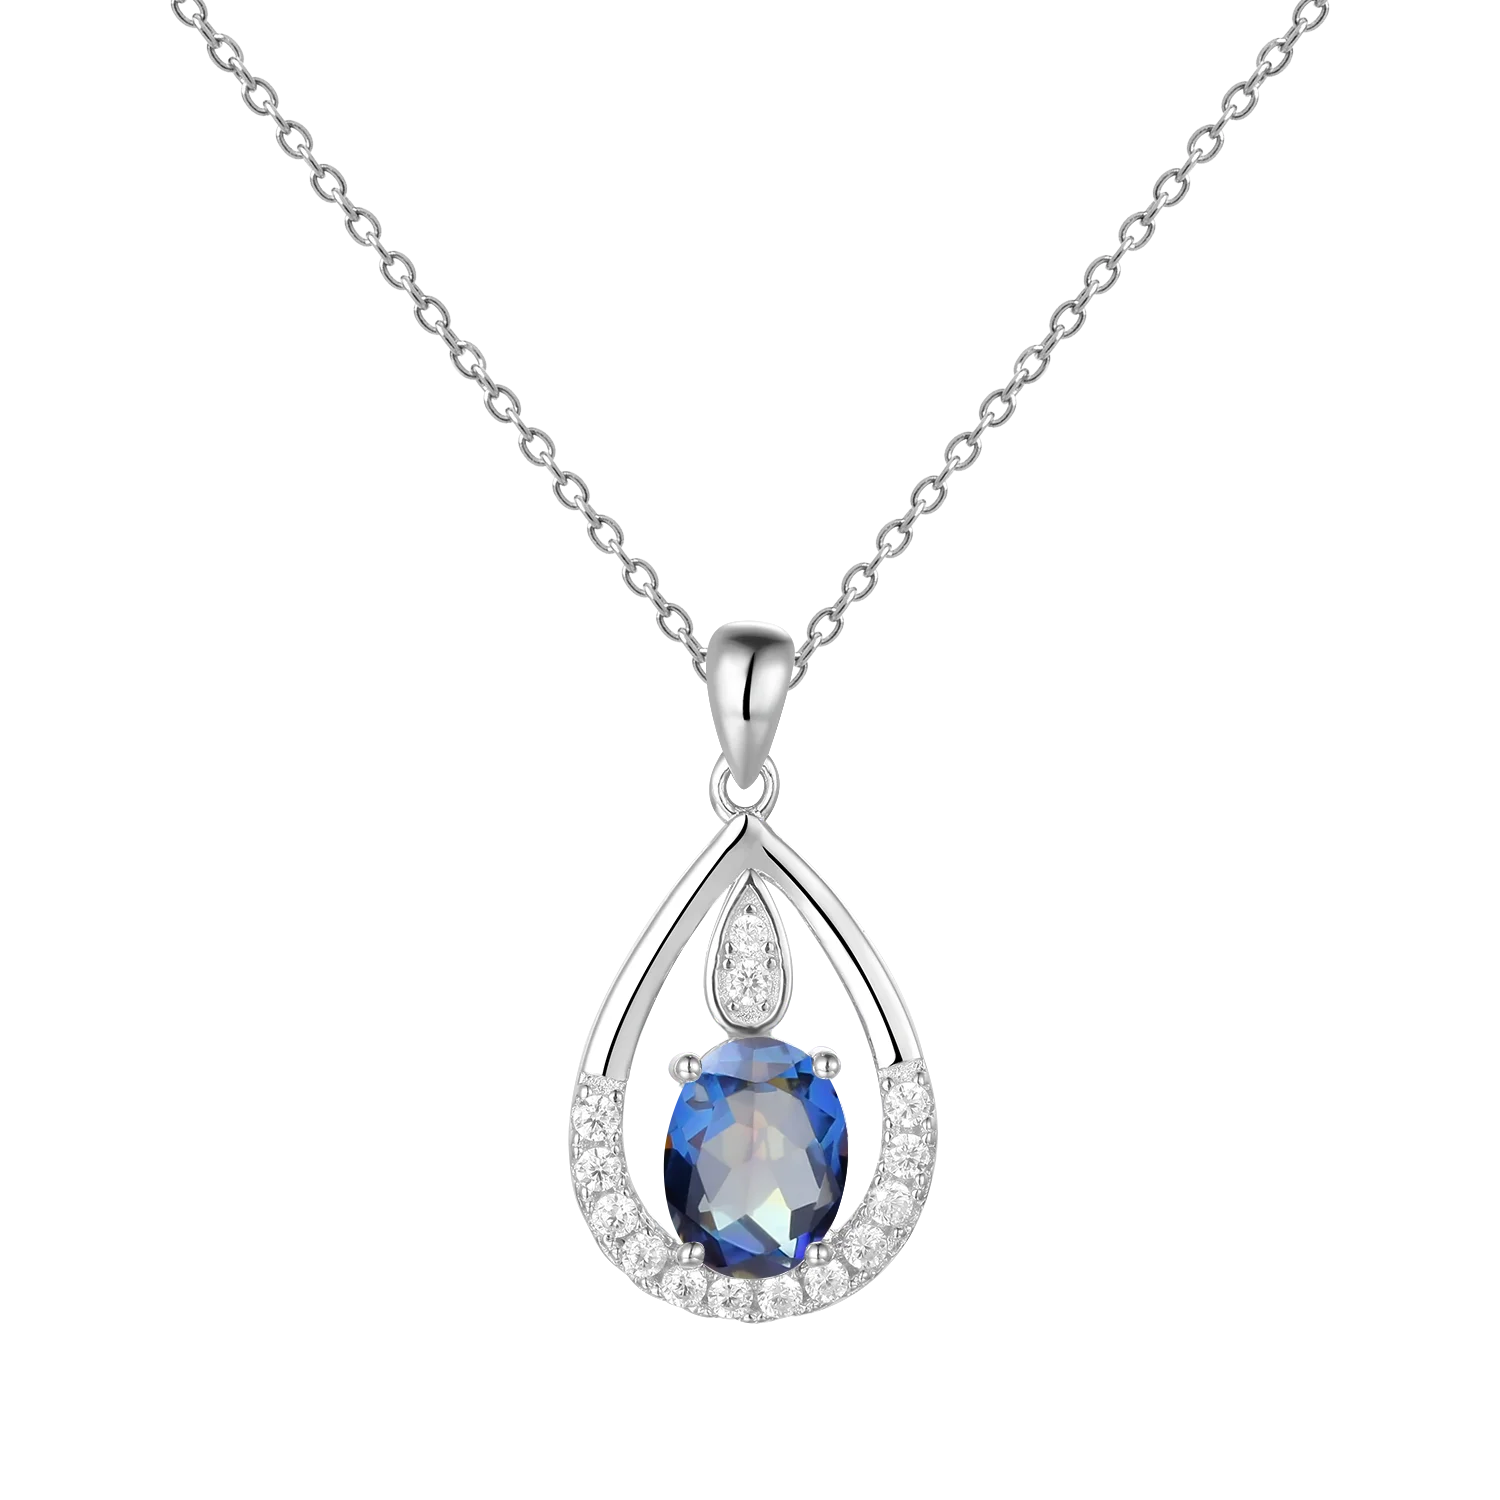 Gem's Ballet December Birthstone Topaz Necklace 6x8mm Oval Pink Topaz Pendant Necklace in 925 Sterling Silver with 18" Chain Blueish